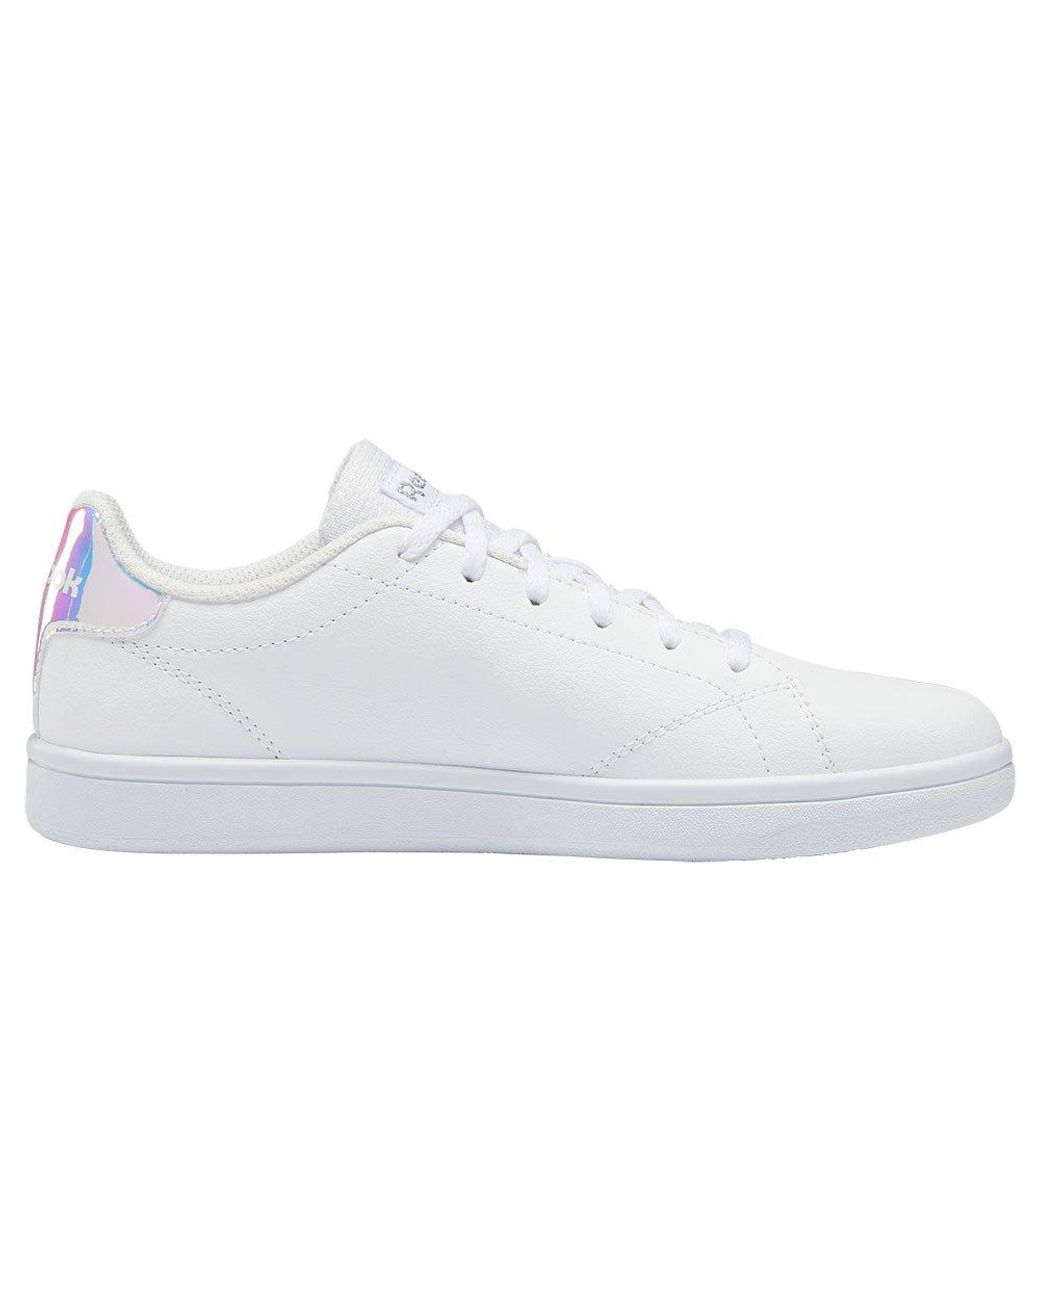 Reebok Royal Complete Sport Trainers in White | Lyst